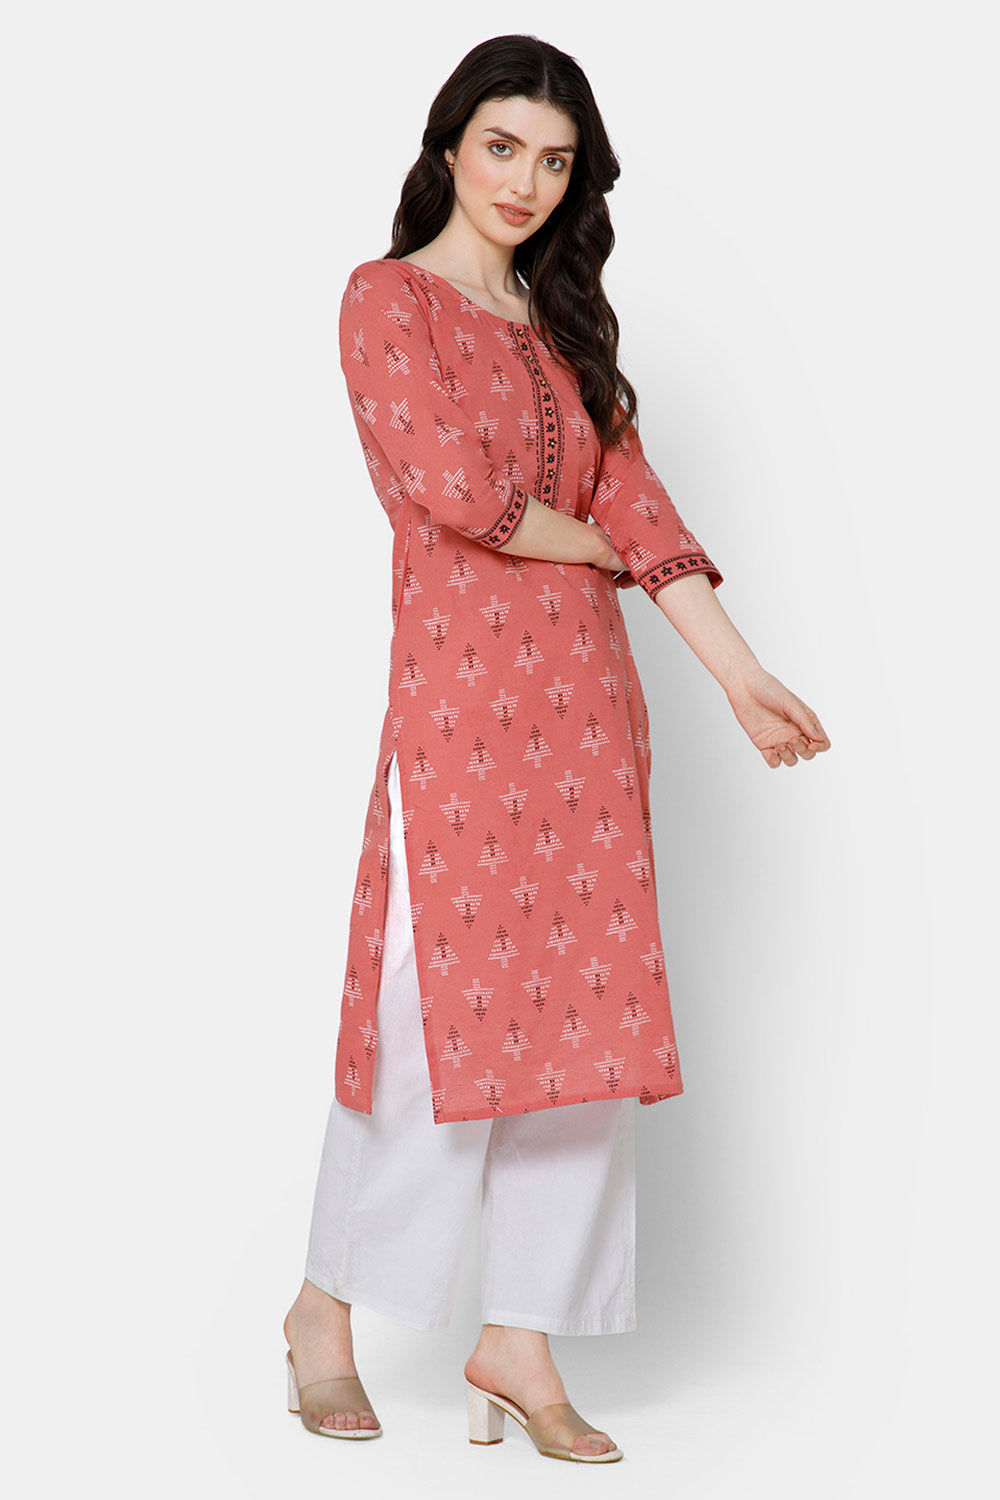 Mythri Women's Casual Kurthi with Patchwork And Minimalistic Embroidery - Peach - E029